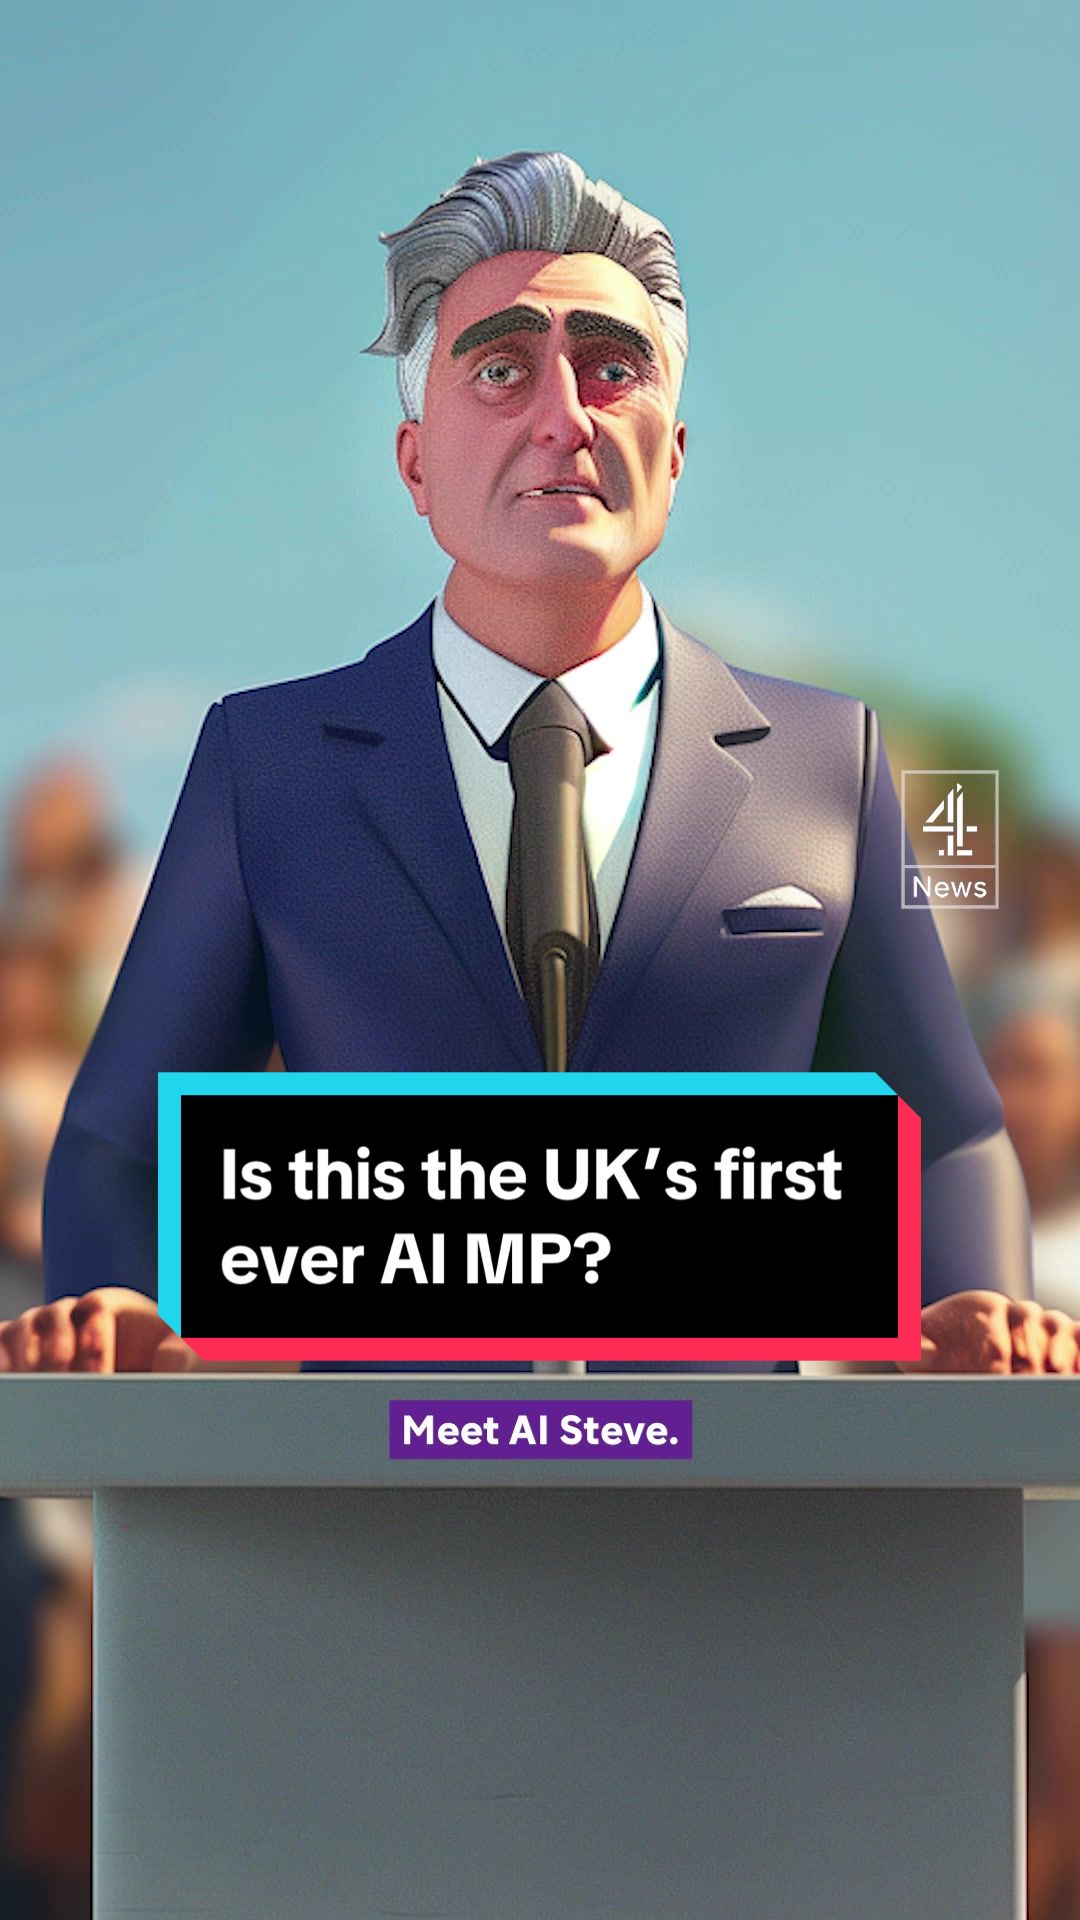 Meet AI Steve - the first AI candidate running for the UK election. He says it’s an attempt to ‘reform democracy’. But would Westminster really be better off if it was filled with Artificial Intelligence MPs? #ai #election #candidate #channel4news